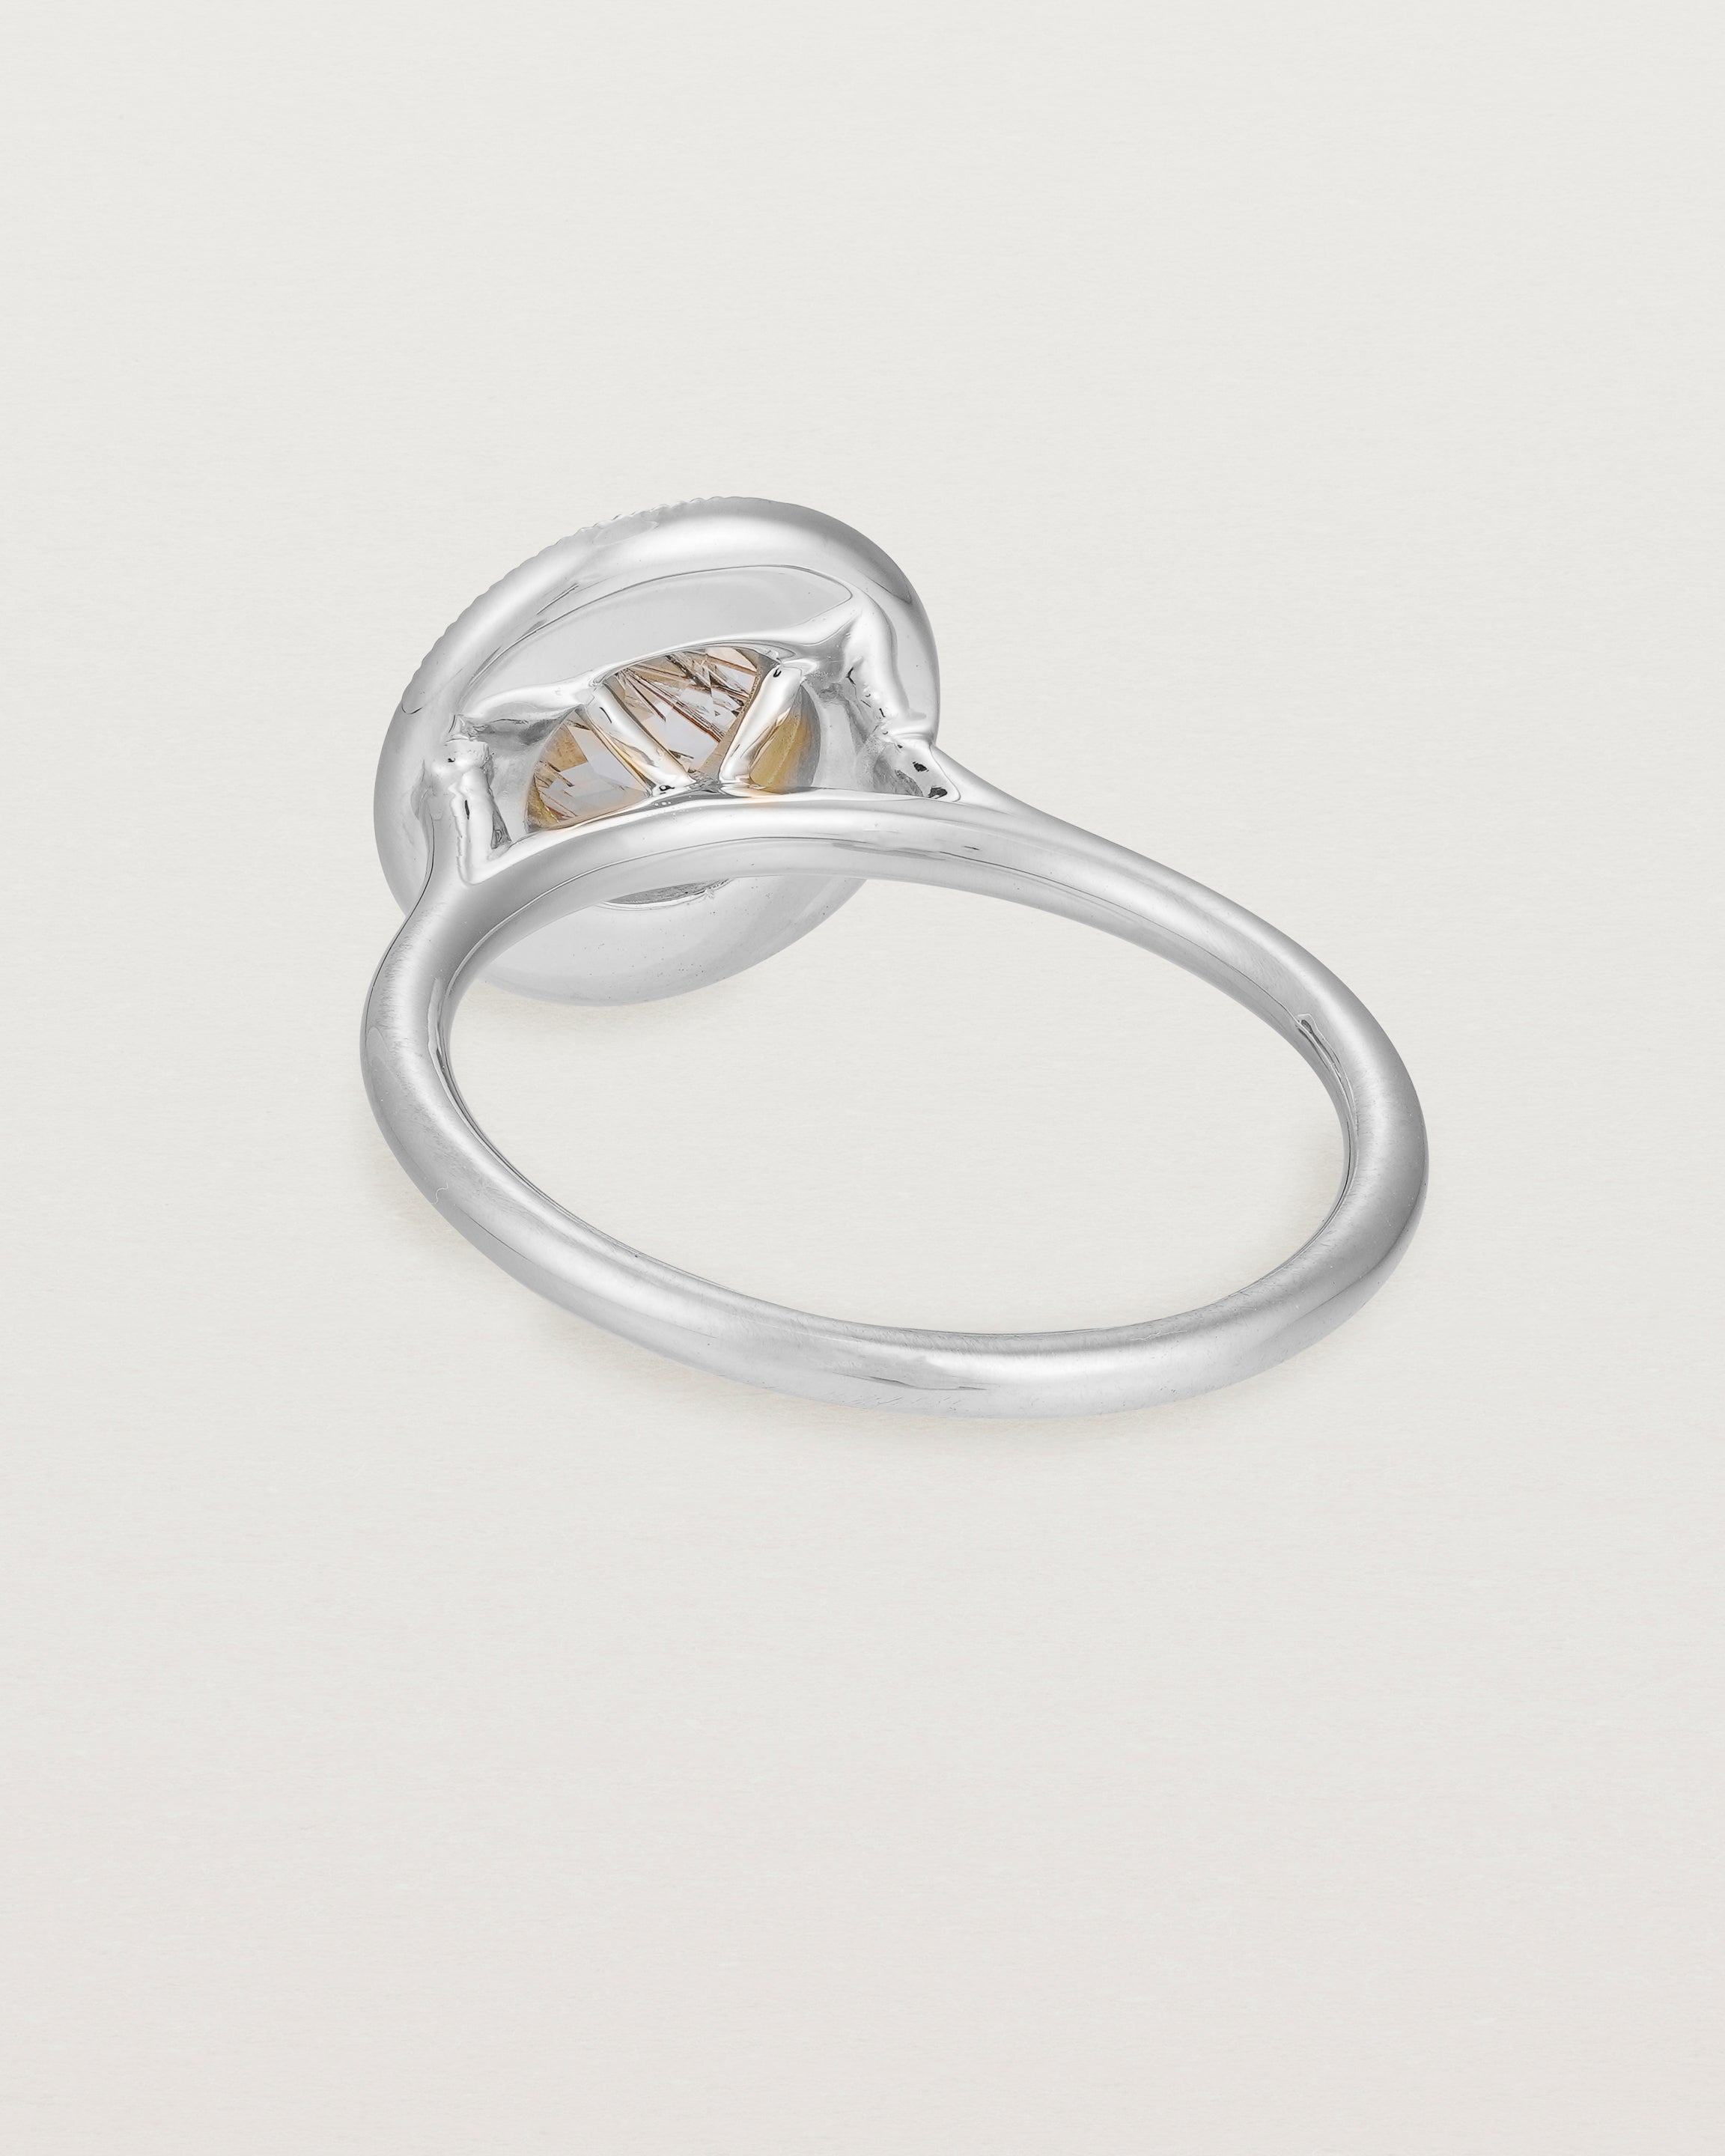 Back view of the Imogen Halo Ring | Rutilated Quartz & Diamonds in White Gold.